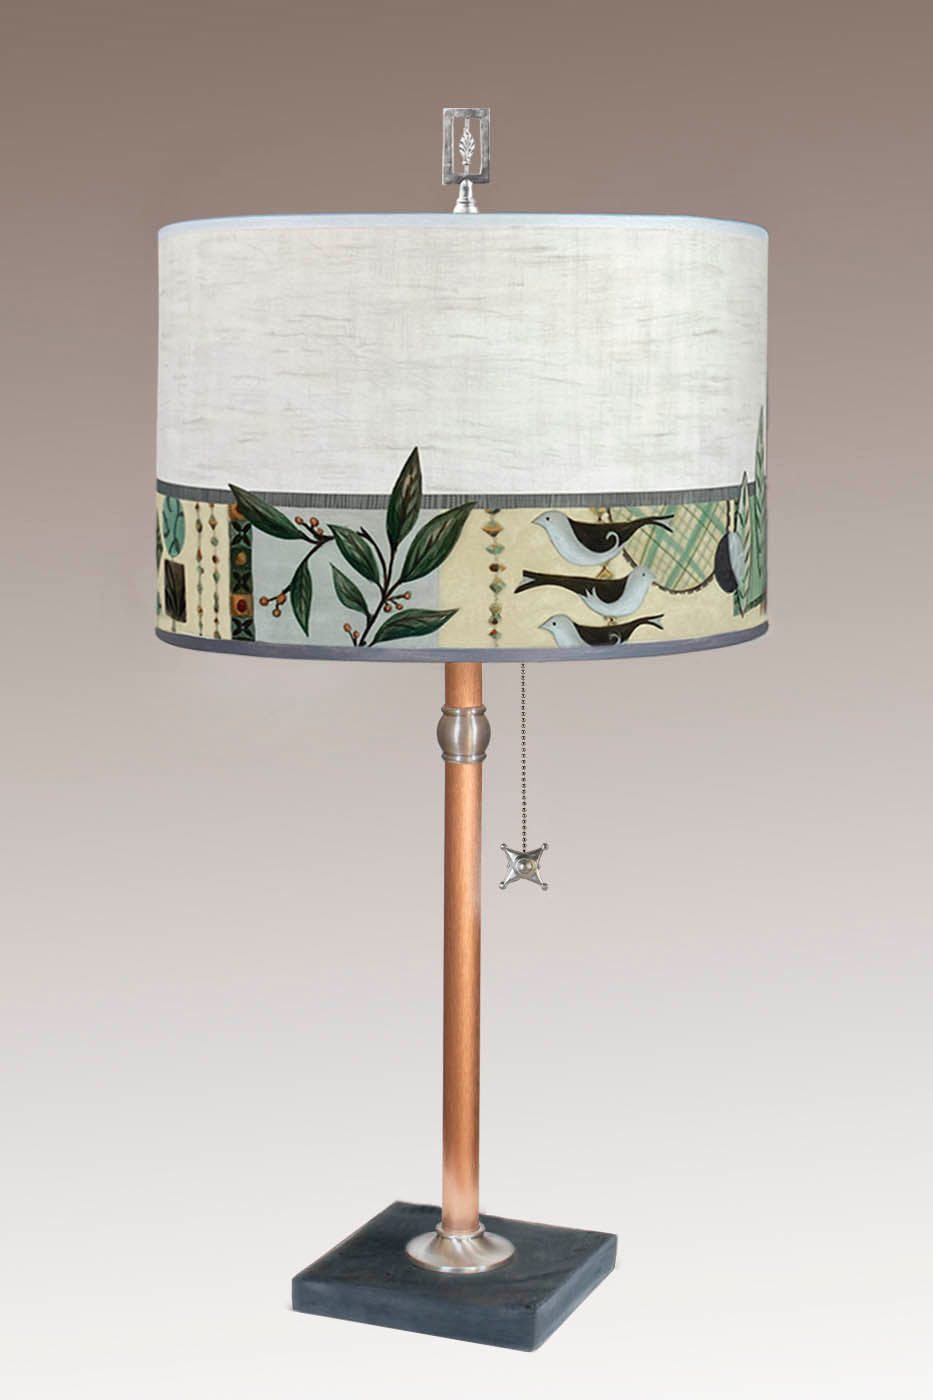 Janna Ugone & Co Table Lamp Copper Table Lamp with Large Drum Shade in New Capri Opal